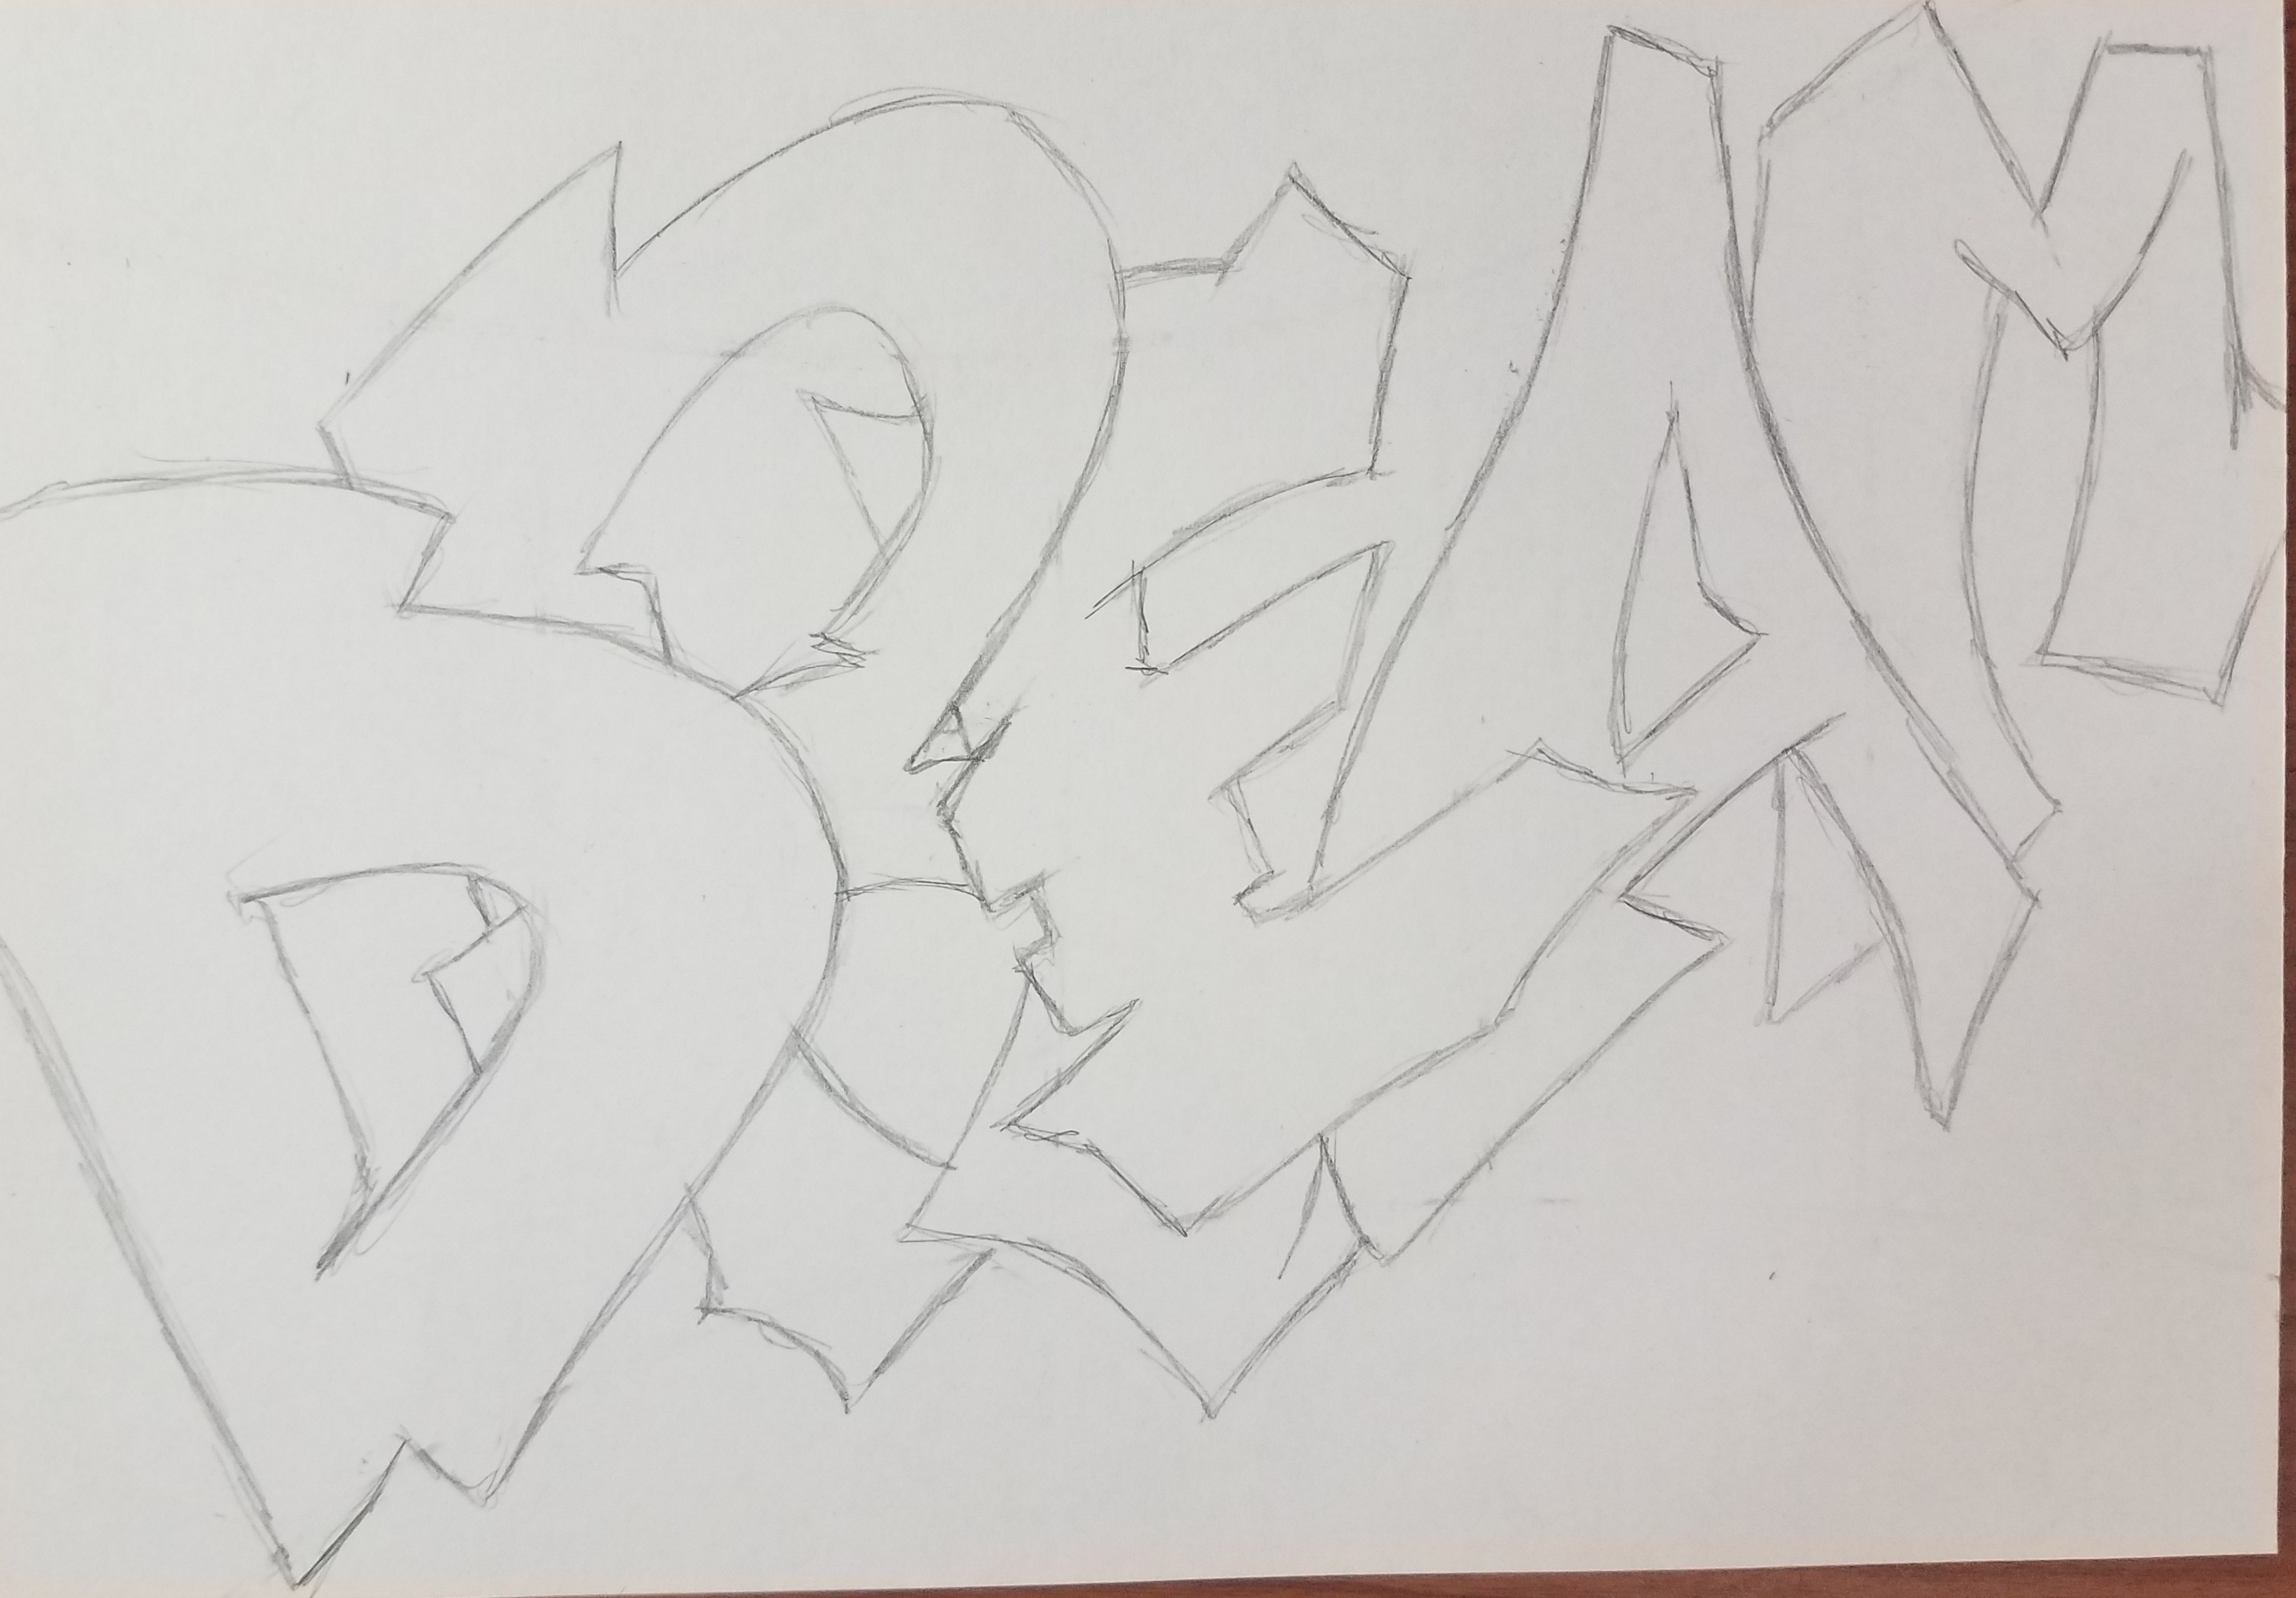 how to draw graffiti step by step